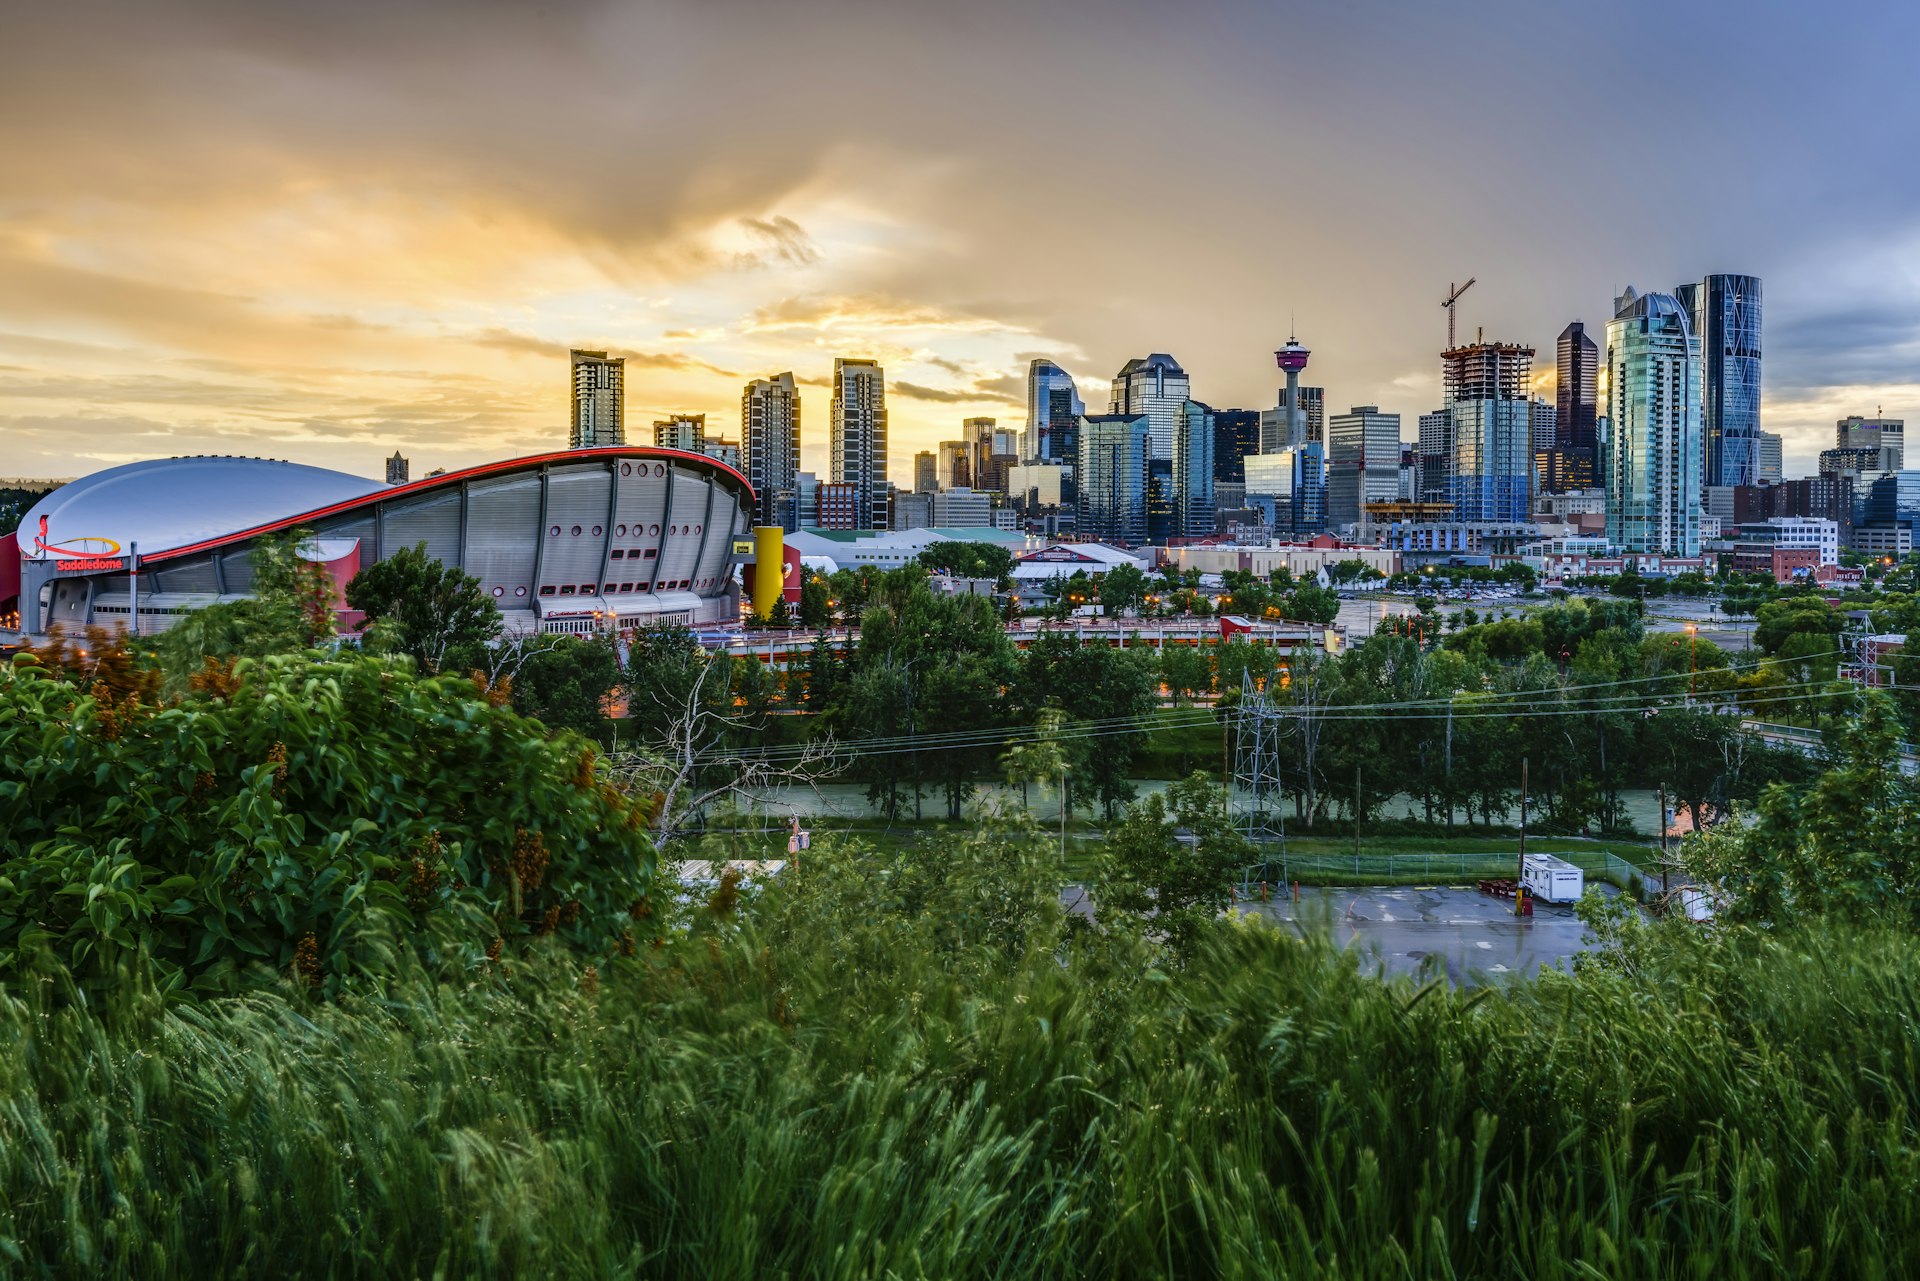 Calgary skyline and the Bow River.